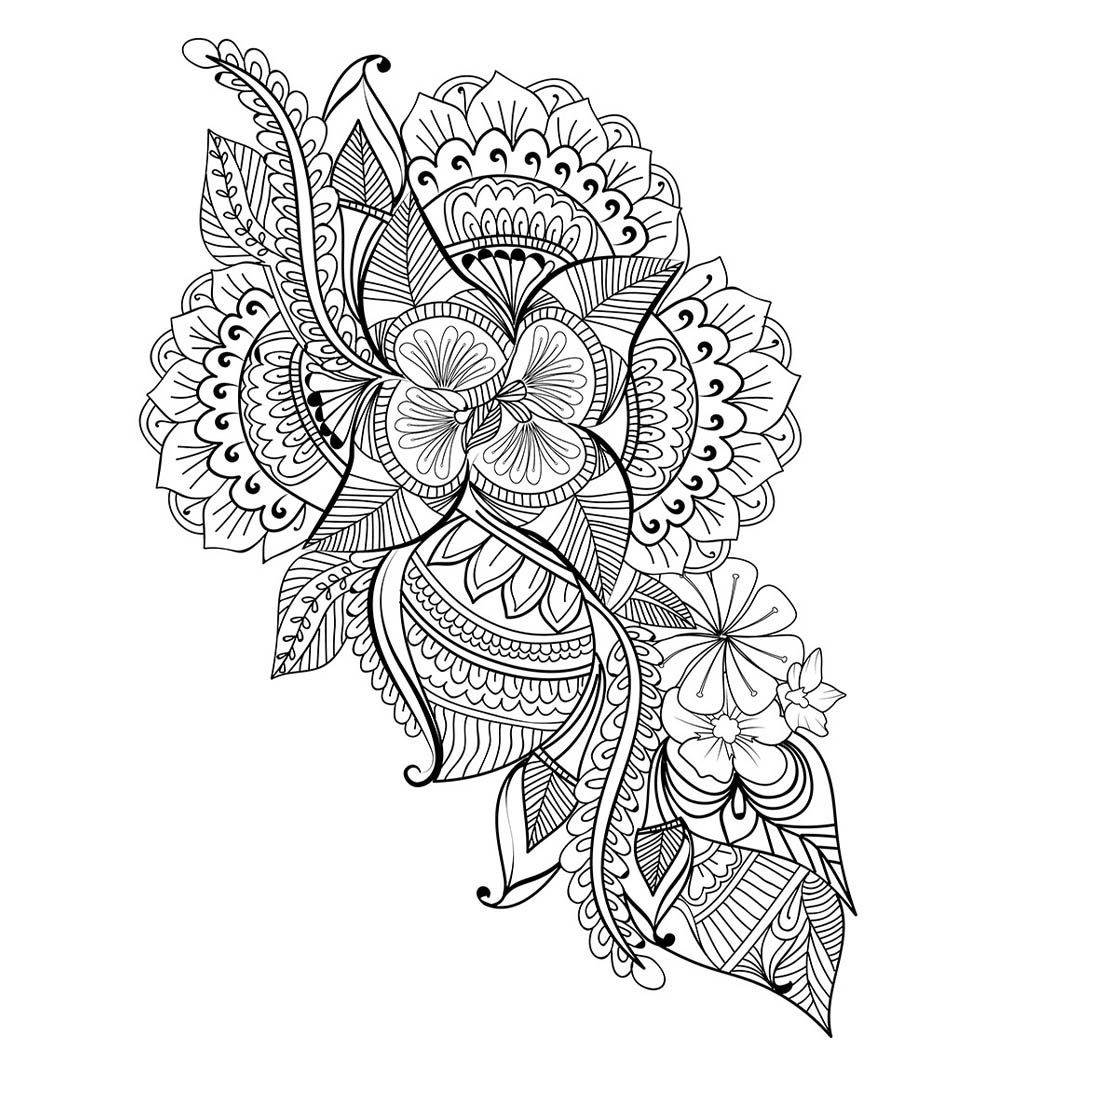 Aesthetic flower doodles, aesthetic flower doodles transparent background, aesthetic flower doodle simple, flower doodle art, flower doodle zentangle art preview image.